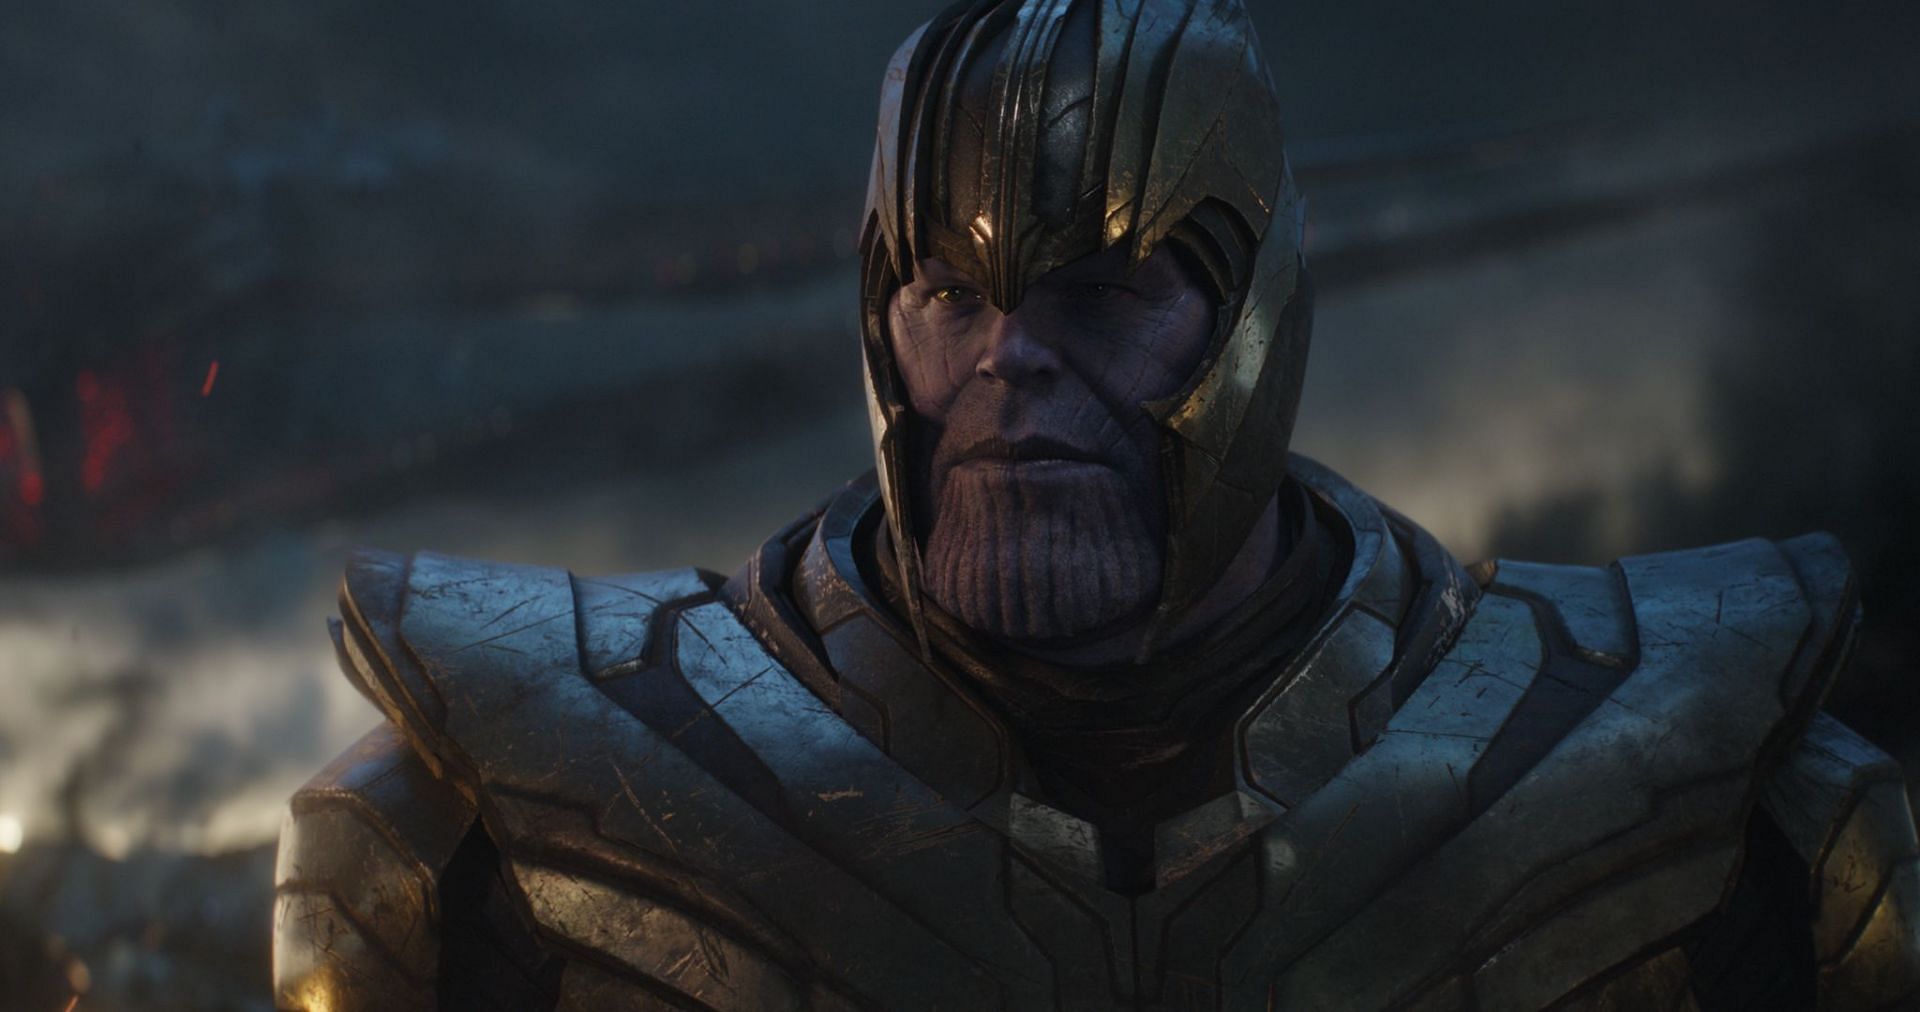 Josh Brolin as Thanos, looking imposing and intimidating with his purple skin and glowing eyes (Image via Marvel Studios)